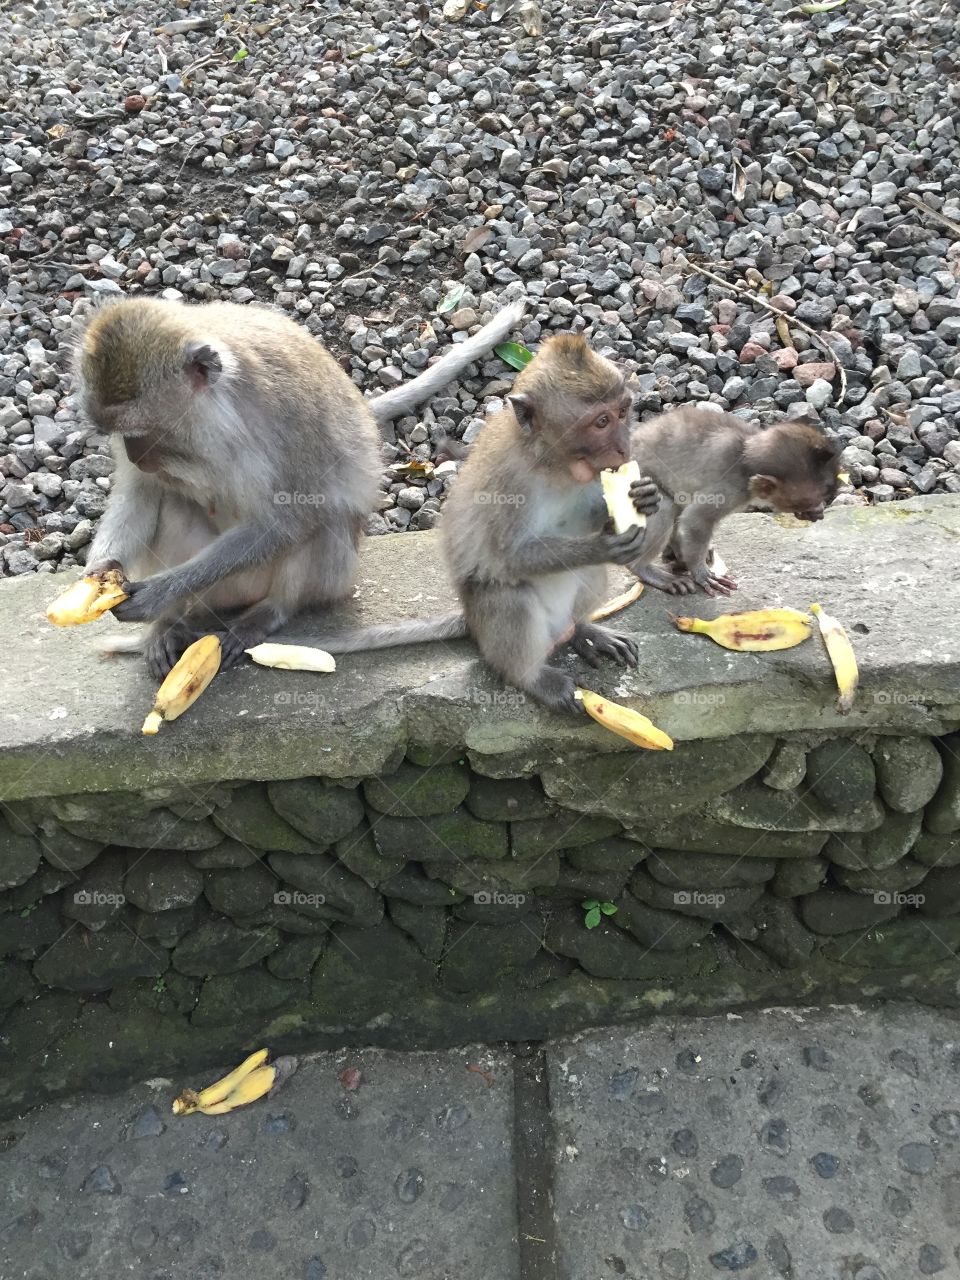 The three amigos. Three monkeys from the monkey forest in Ubud 